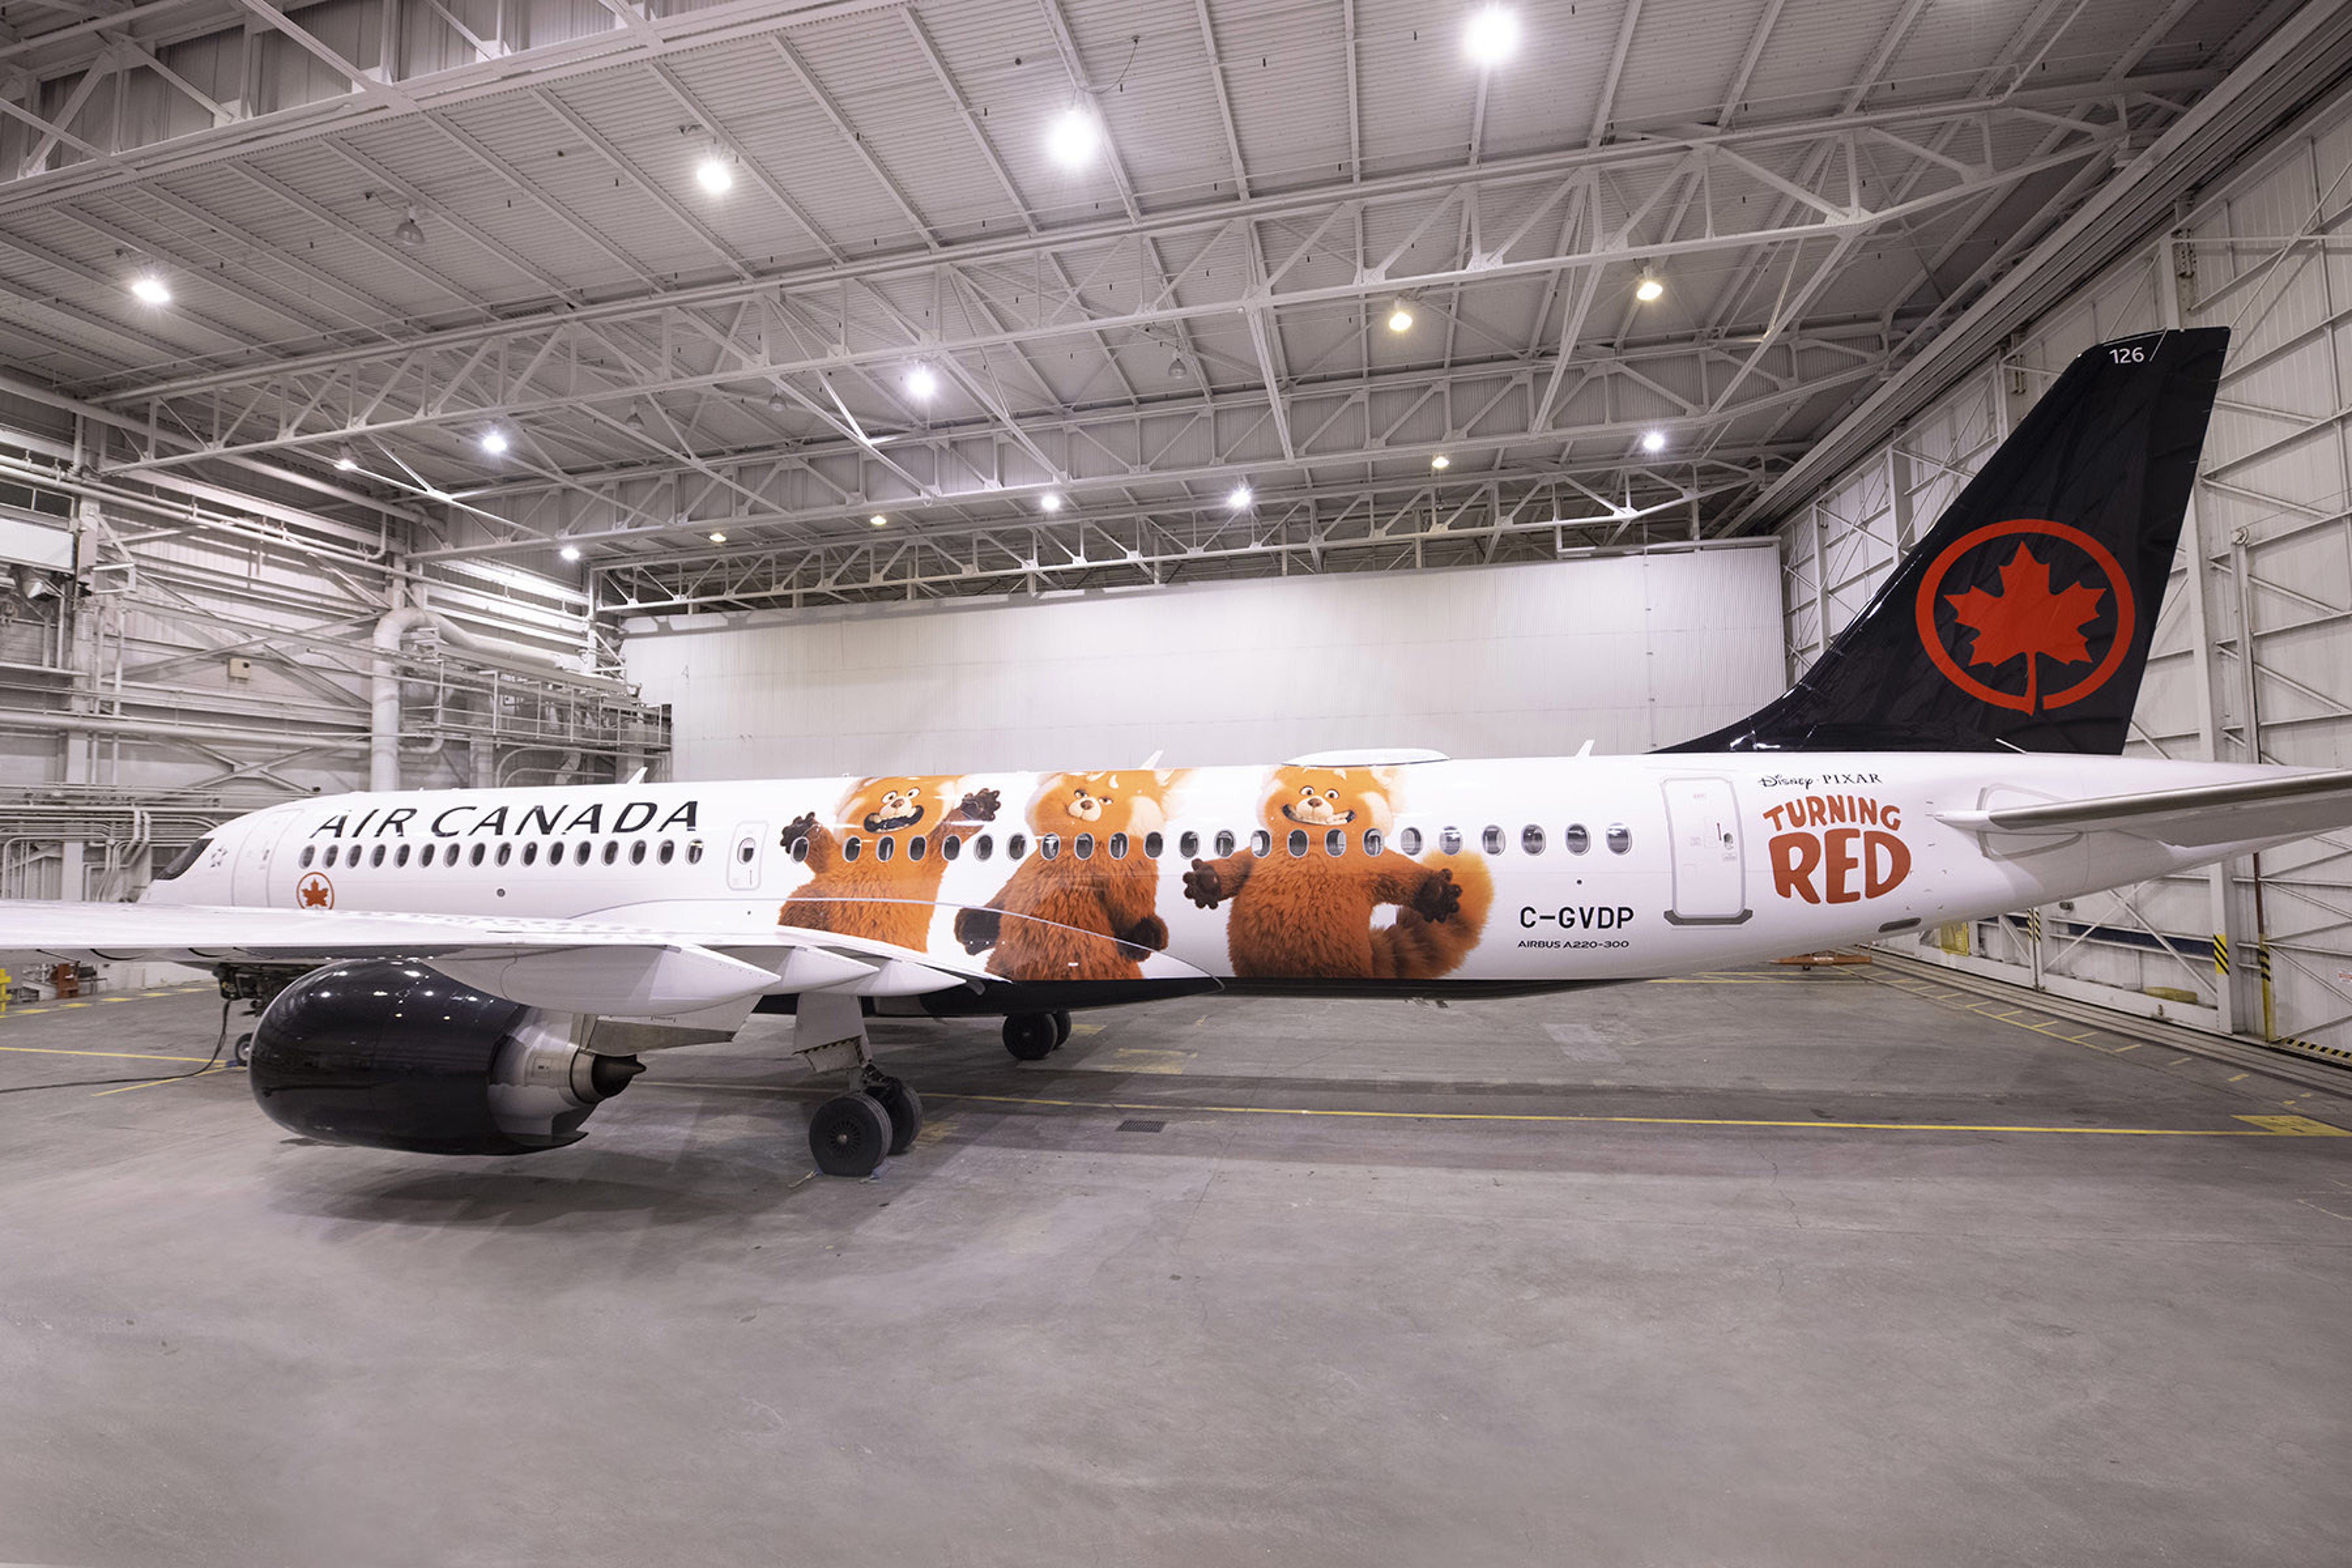 Disney Teams With Air Canada For &#39;Turning Red&#39; Marketing Promotion